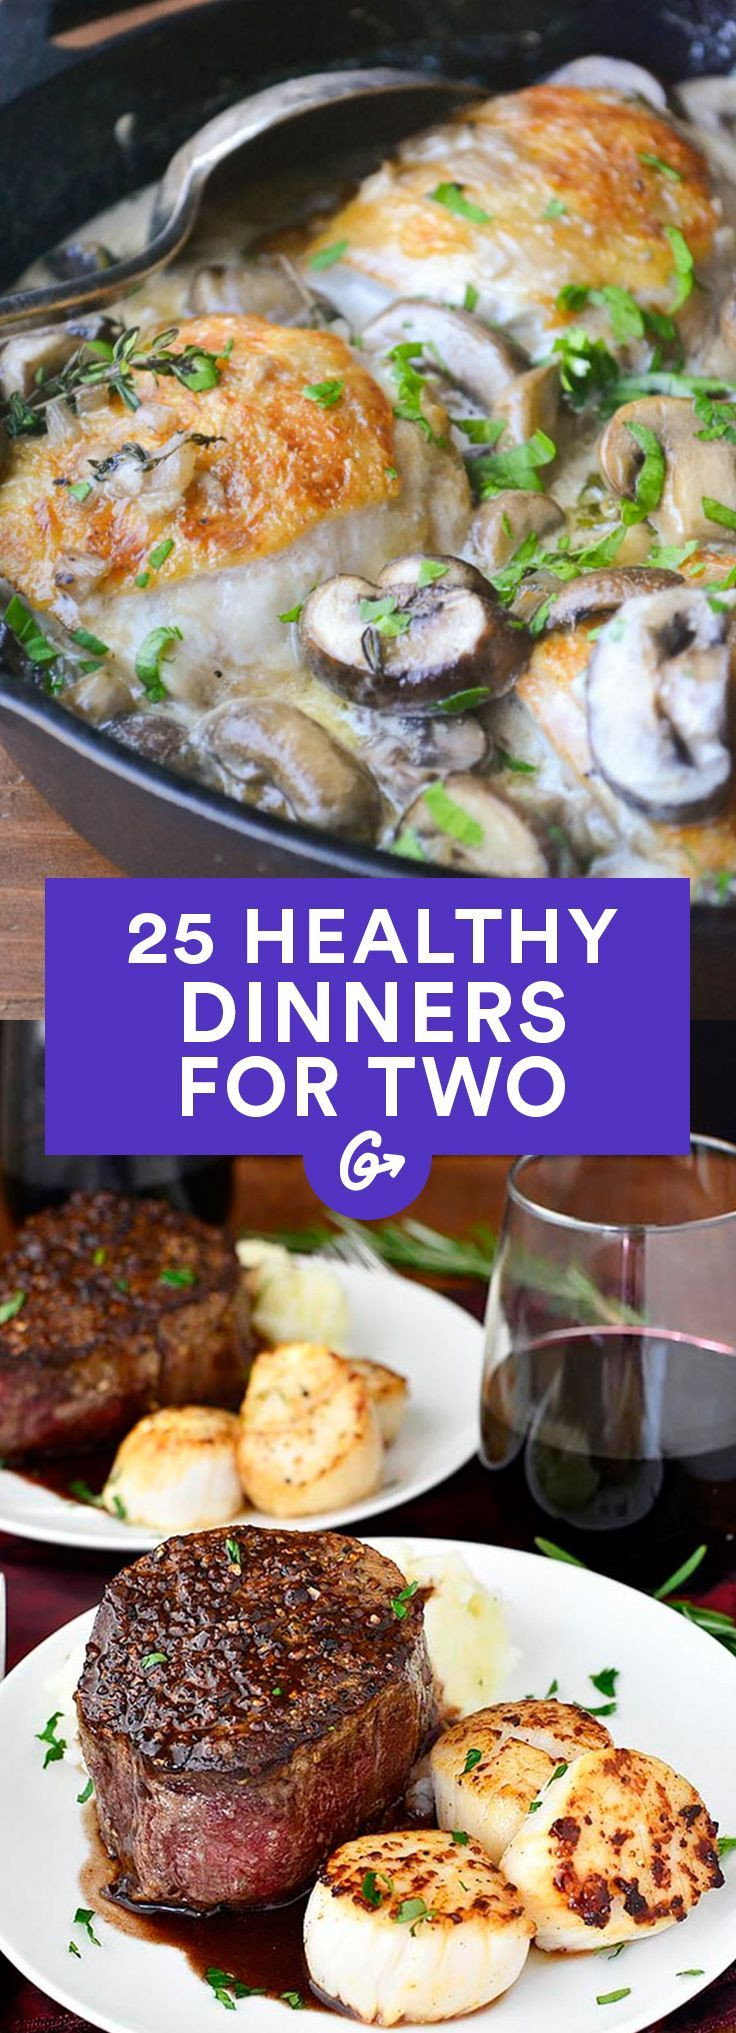 Healthy Cooking For Two
 25 Healthy Dinner Recipes for Two